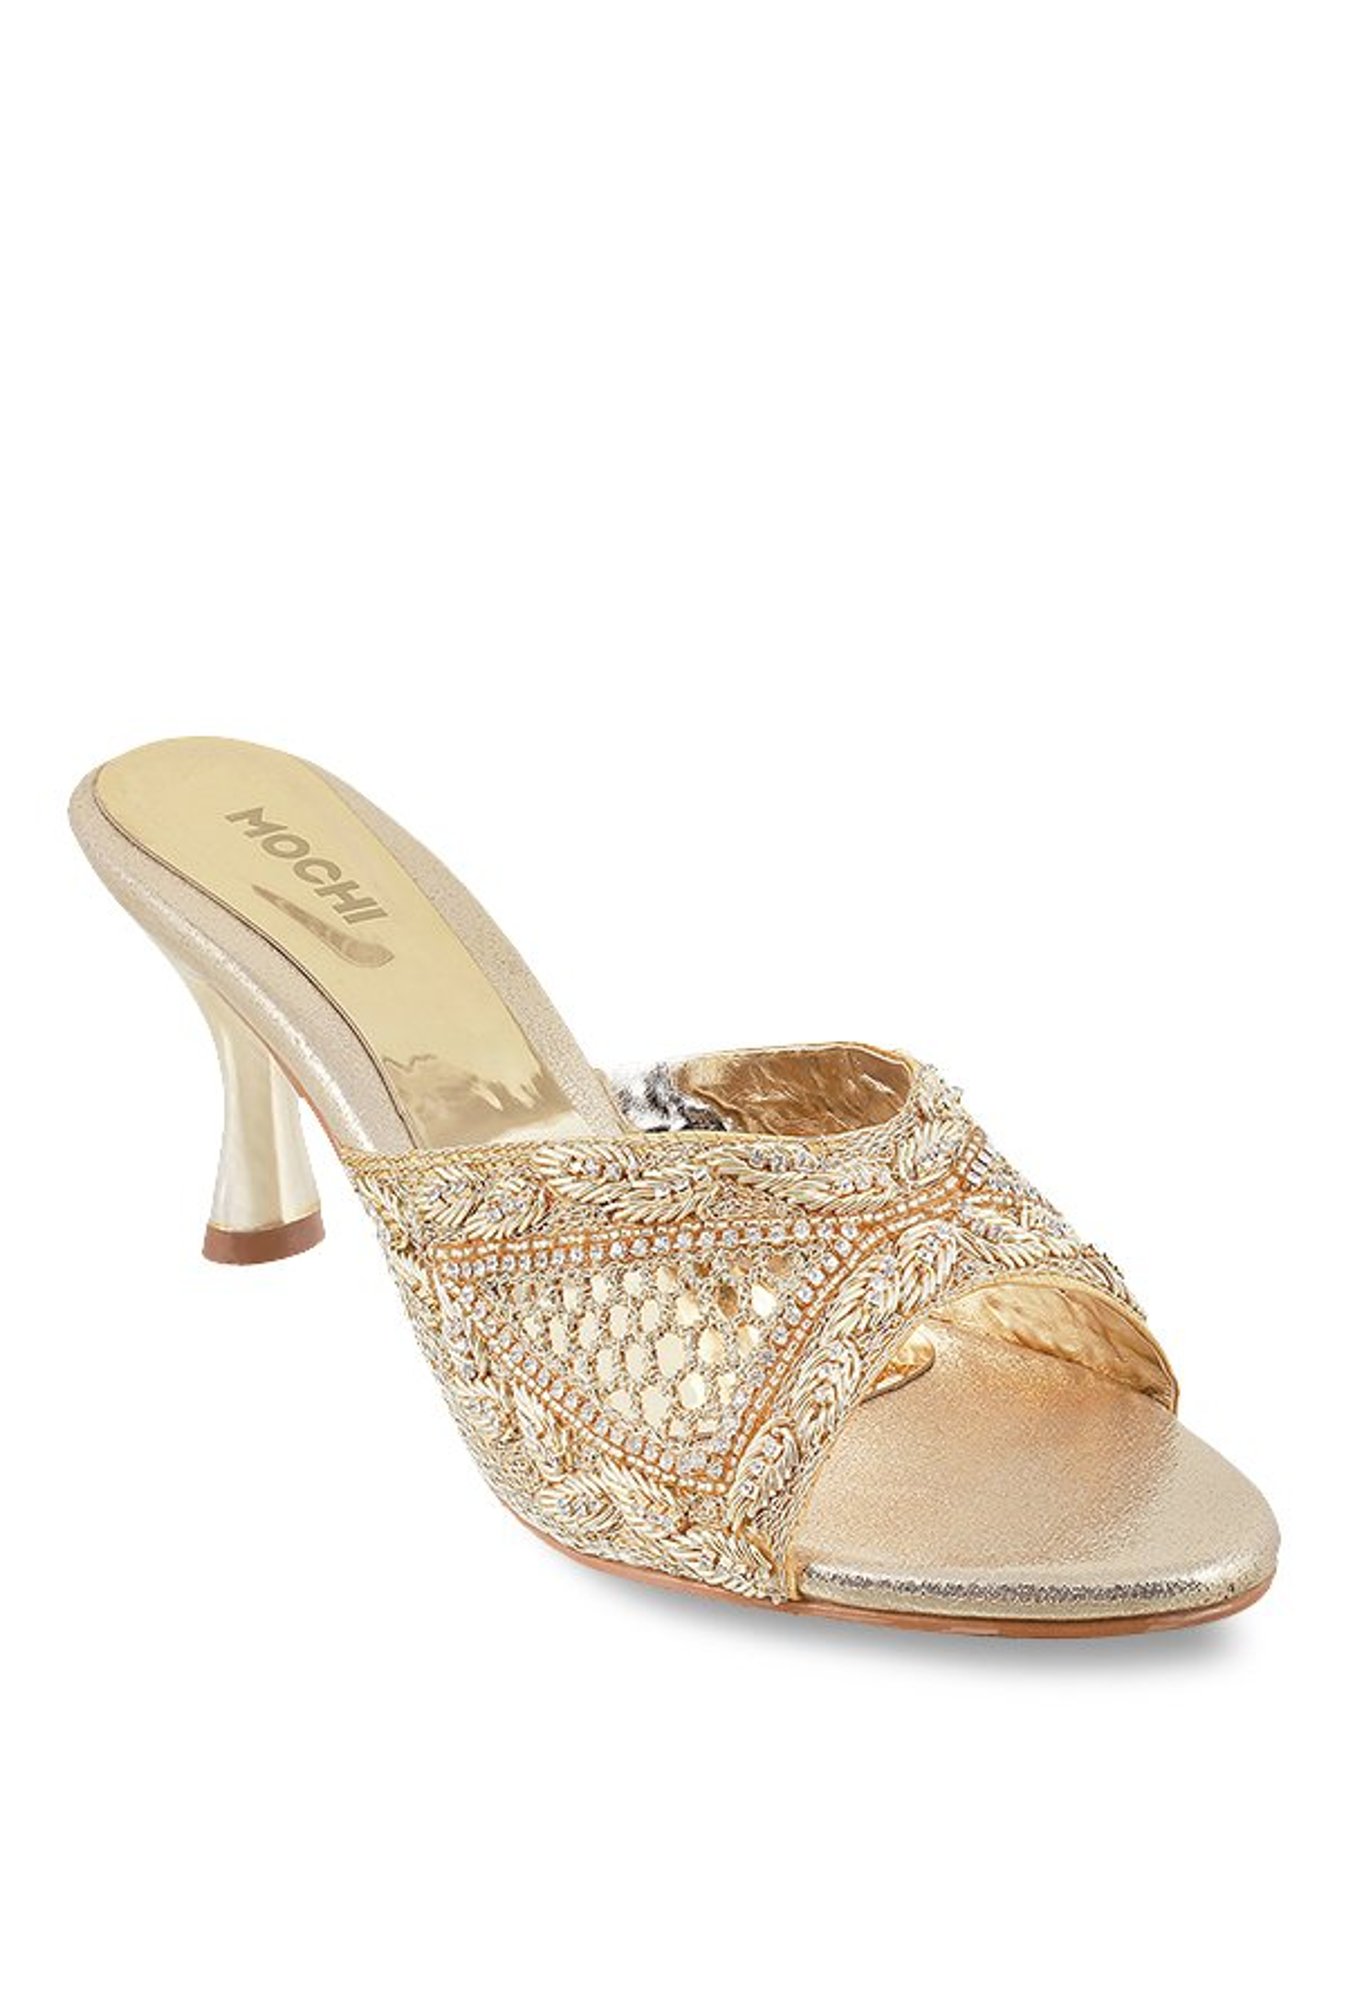 Buy Mochi Women's Antique Gold T-Strap Sandals from top Brands at Best  Prices Online in India | Tata CLiQ